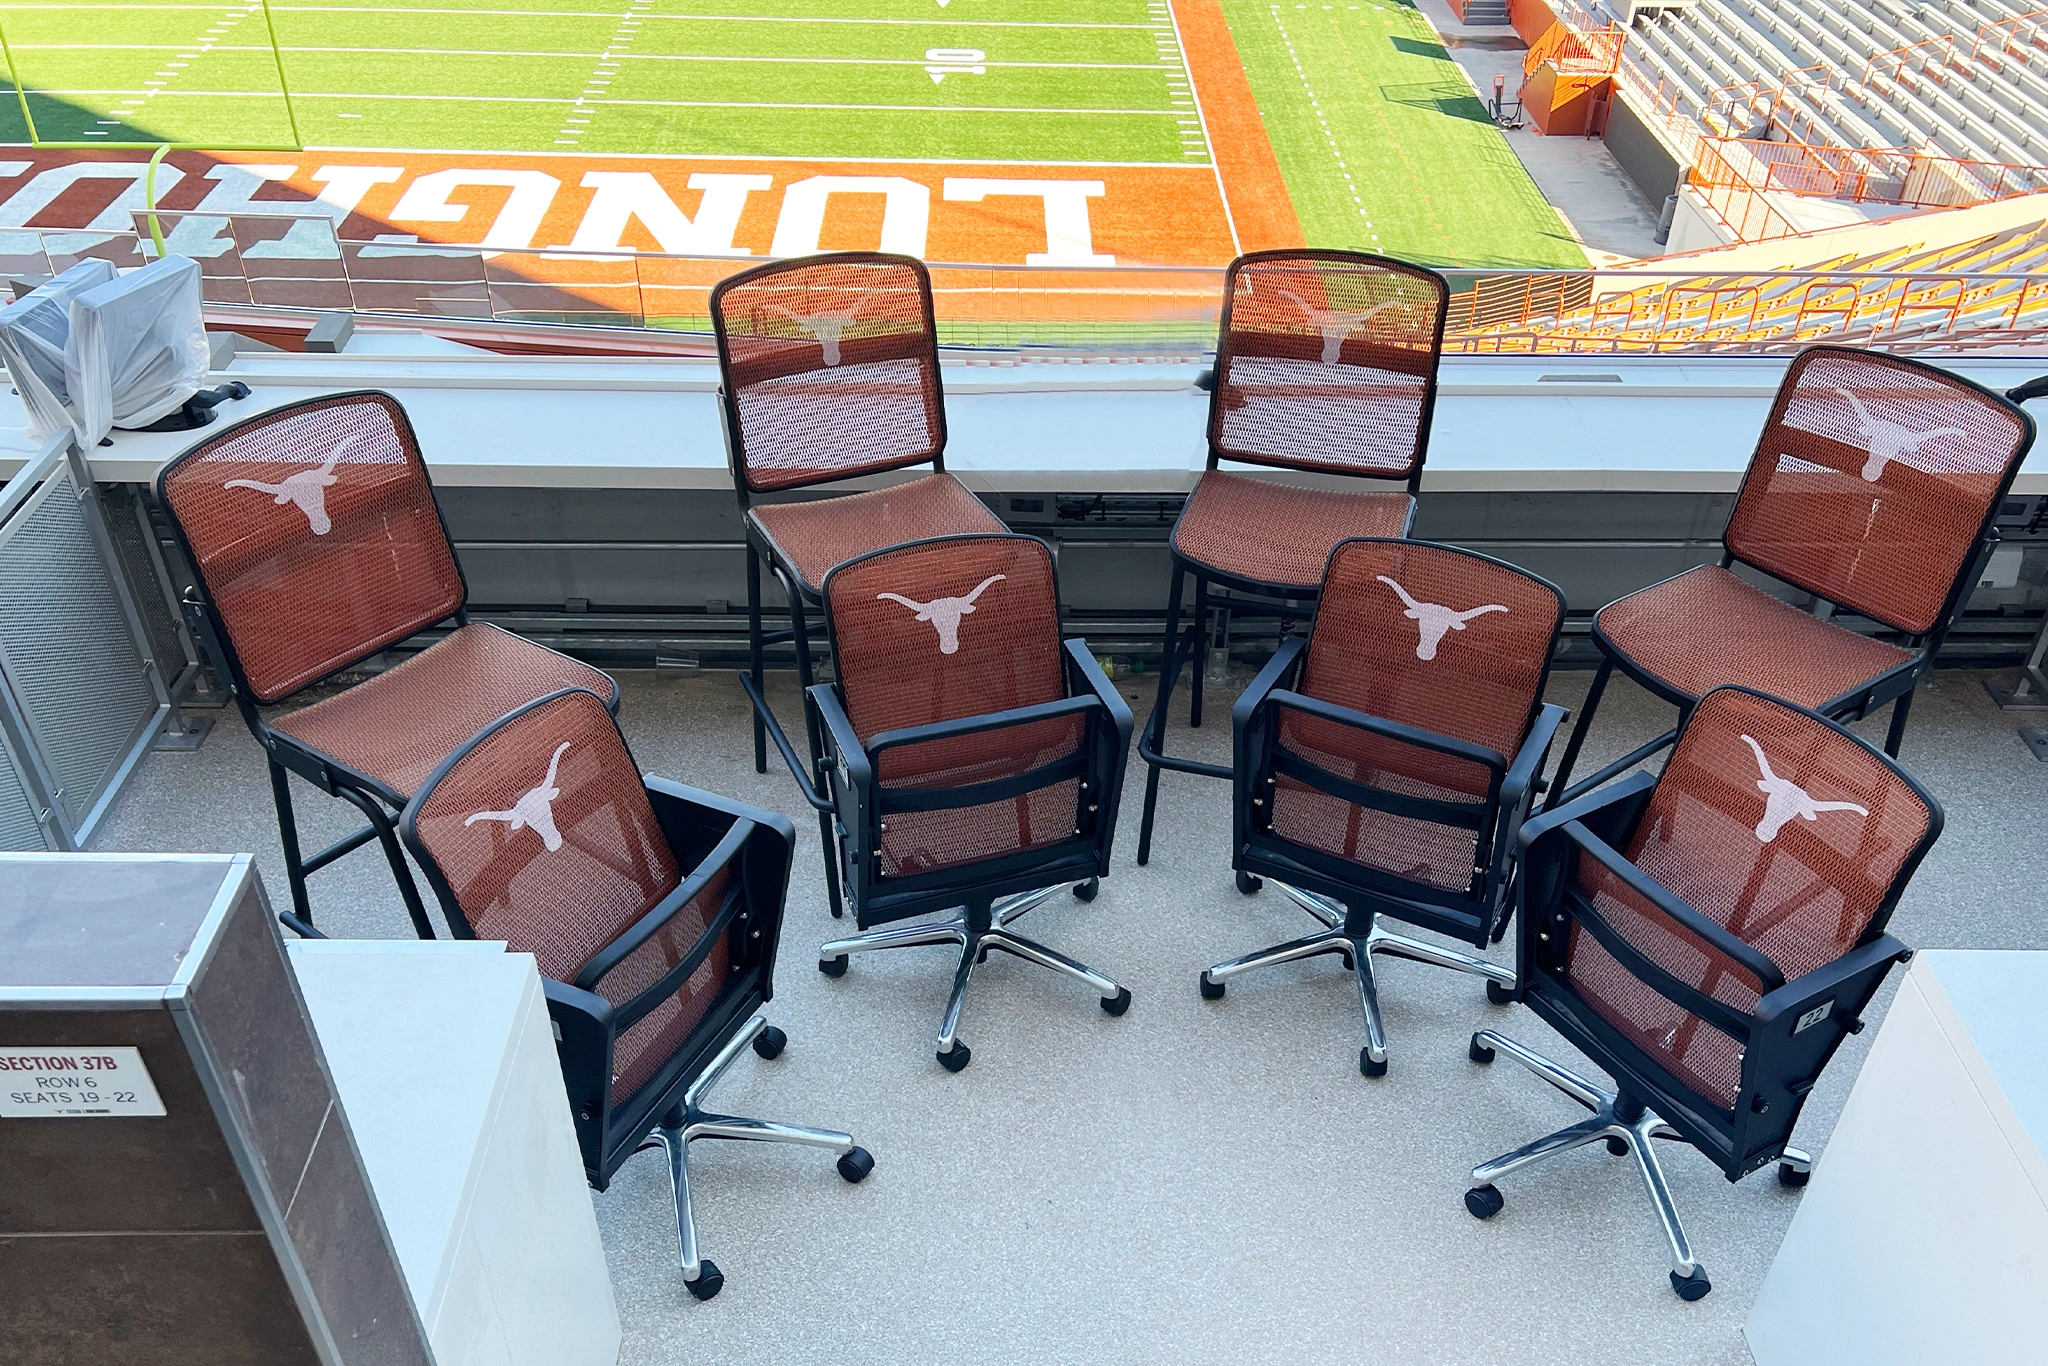 Branded Cool Comfort+ Caster Seats and Barstools at University of Texas